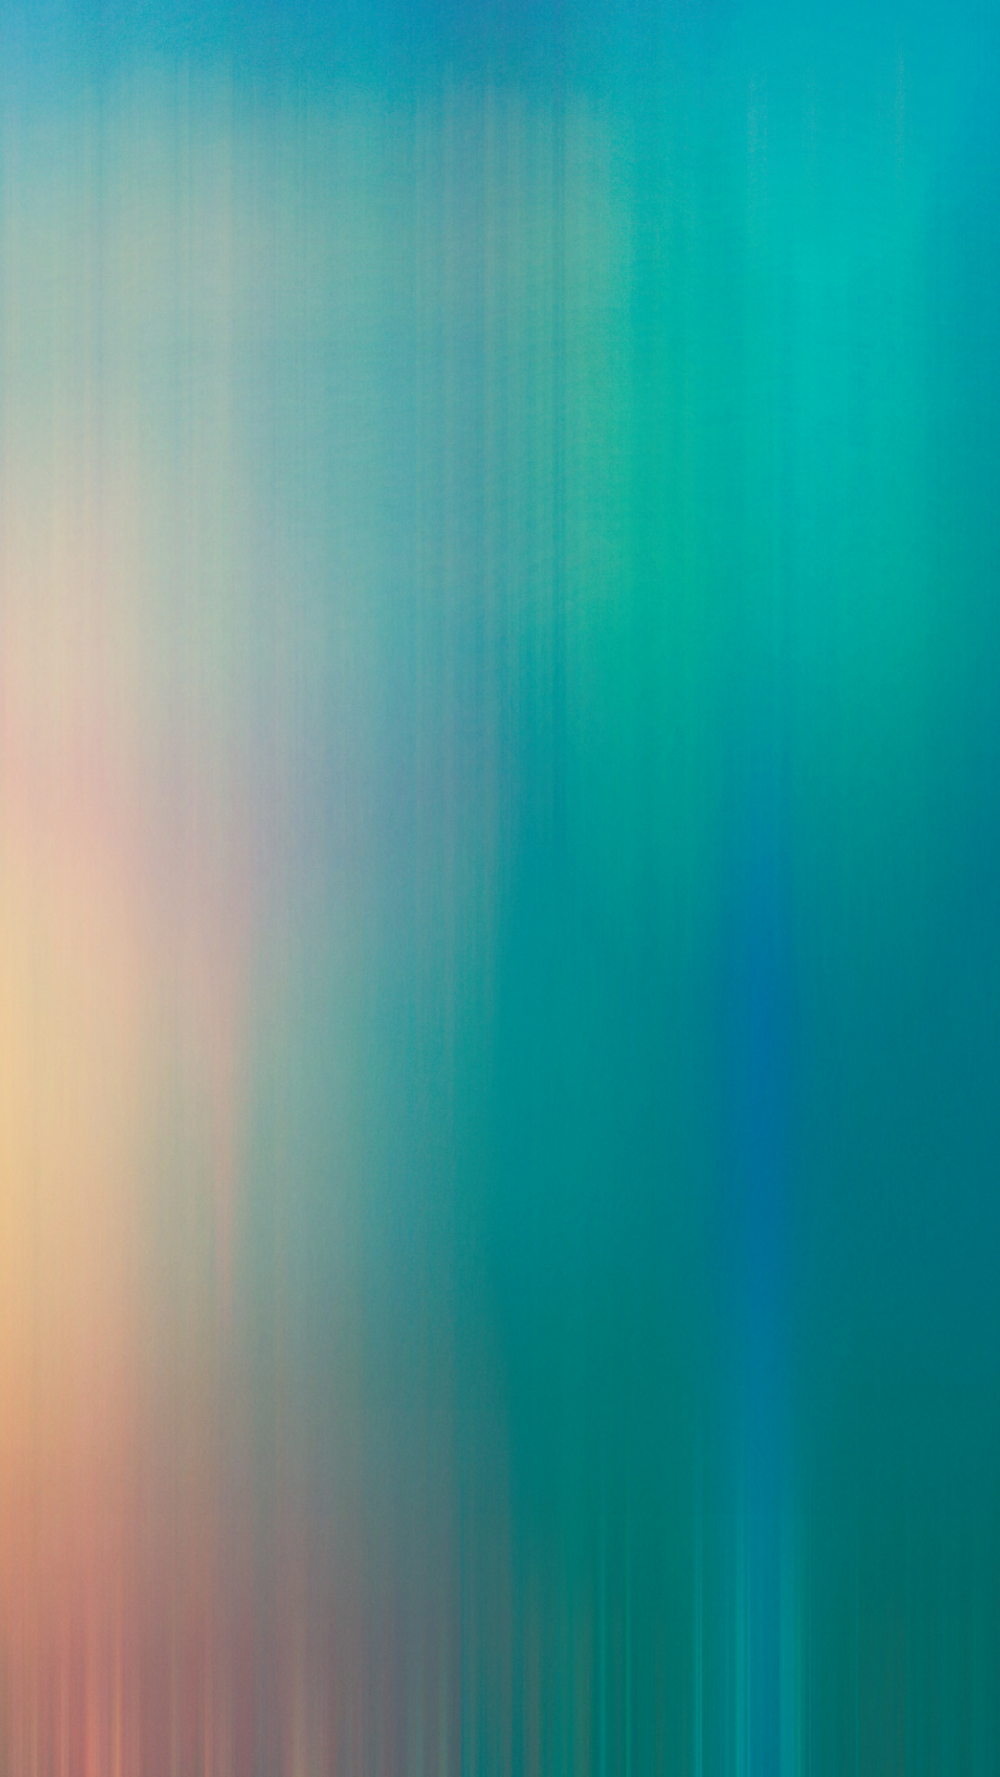 Abstract, turquoise, blur, gradient wallpaper. Turquoise wallpaper, Best iphone wallpaper, iPhone wallpaper